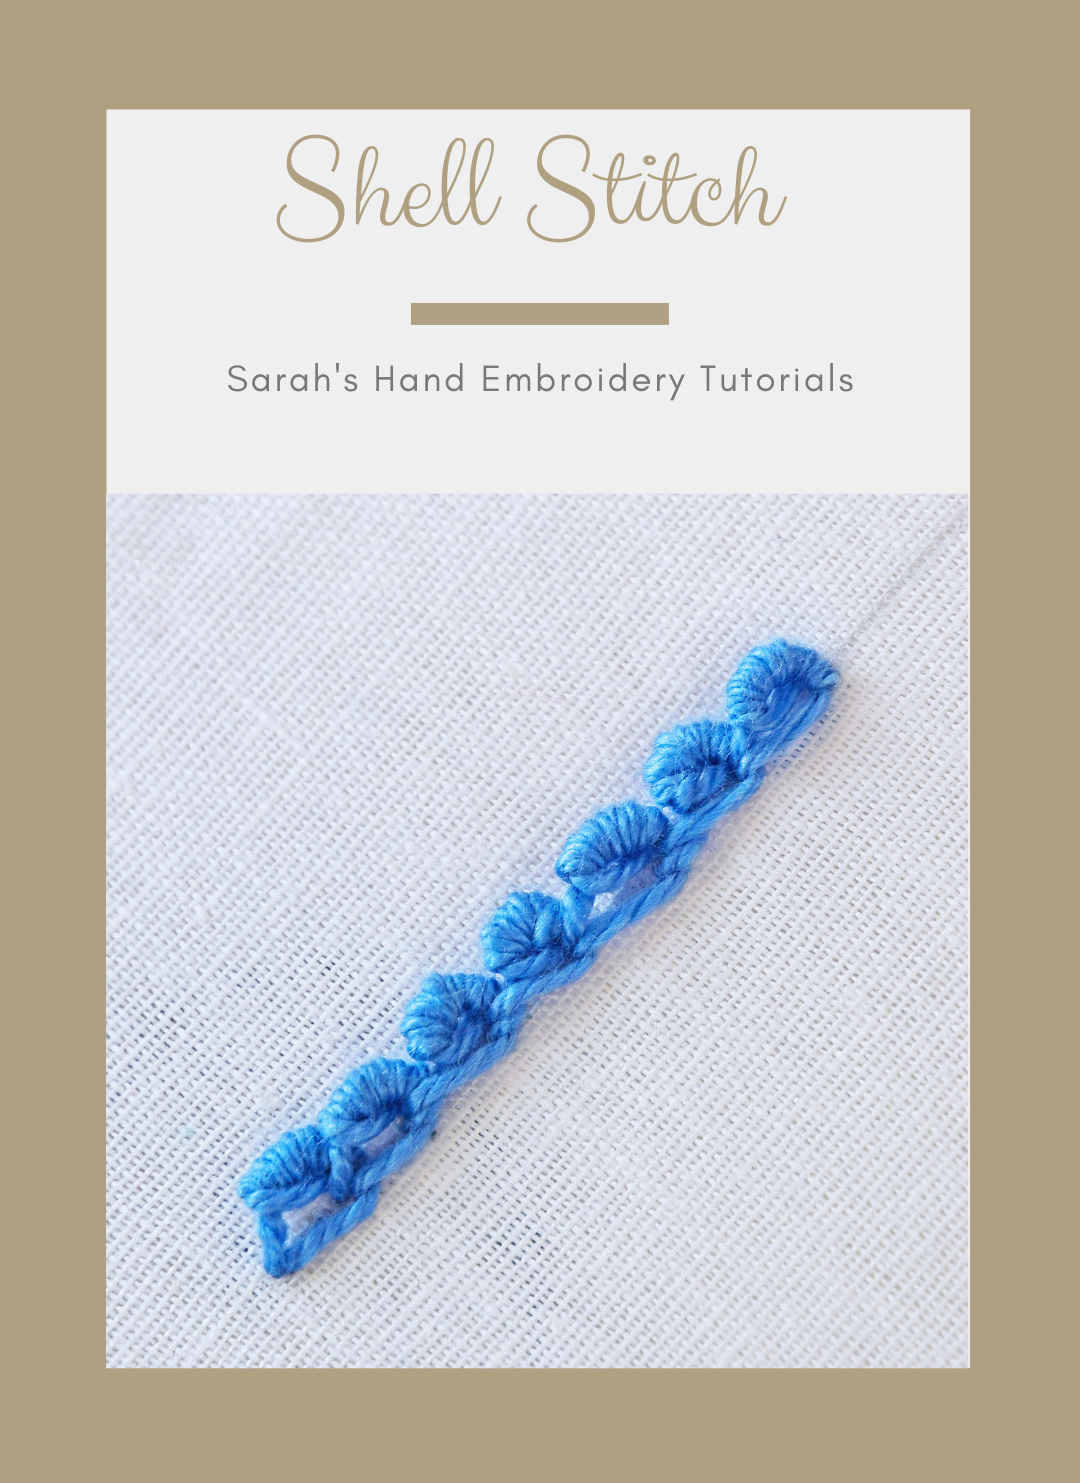 How to do the Shell Stitch - Sarah's Hand Embroidery Tutorials